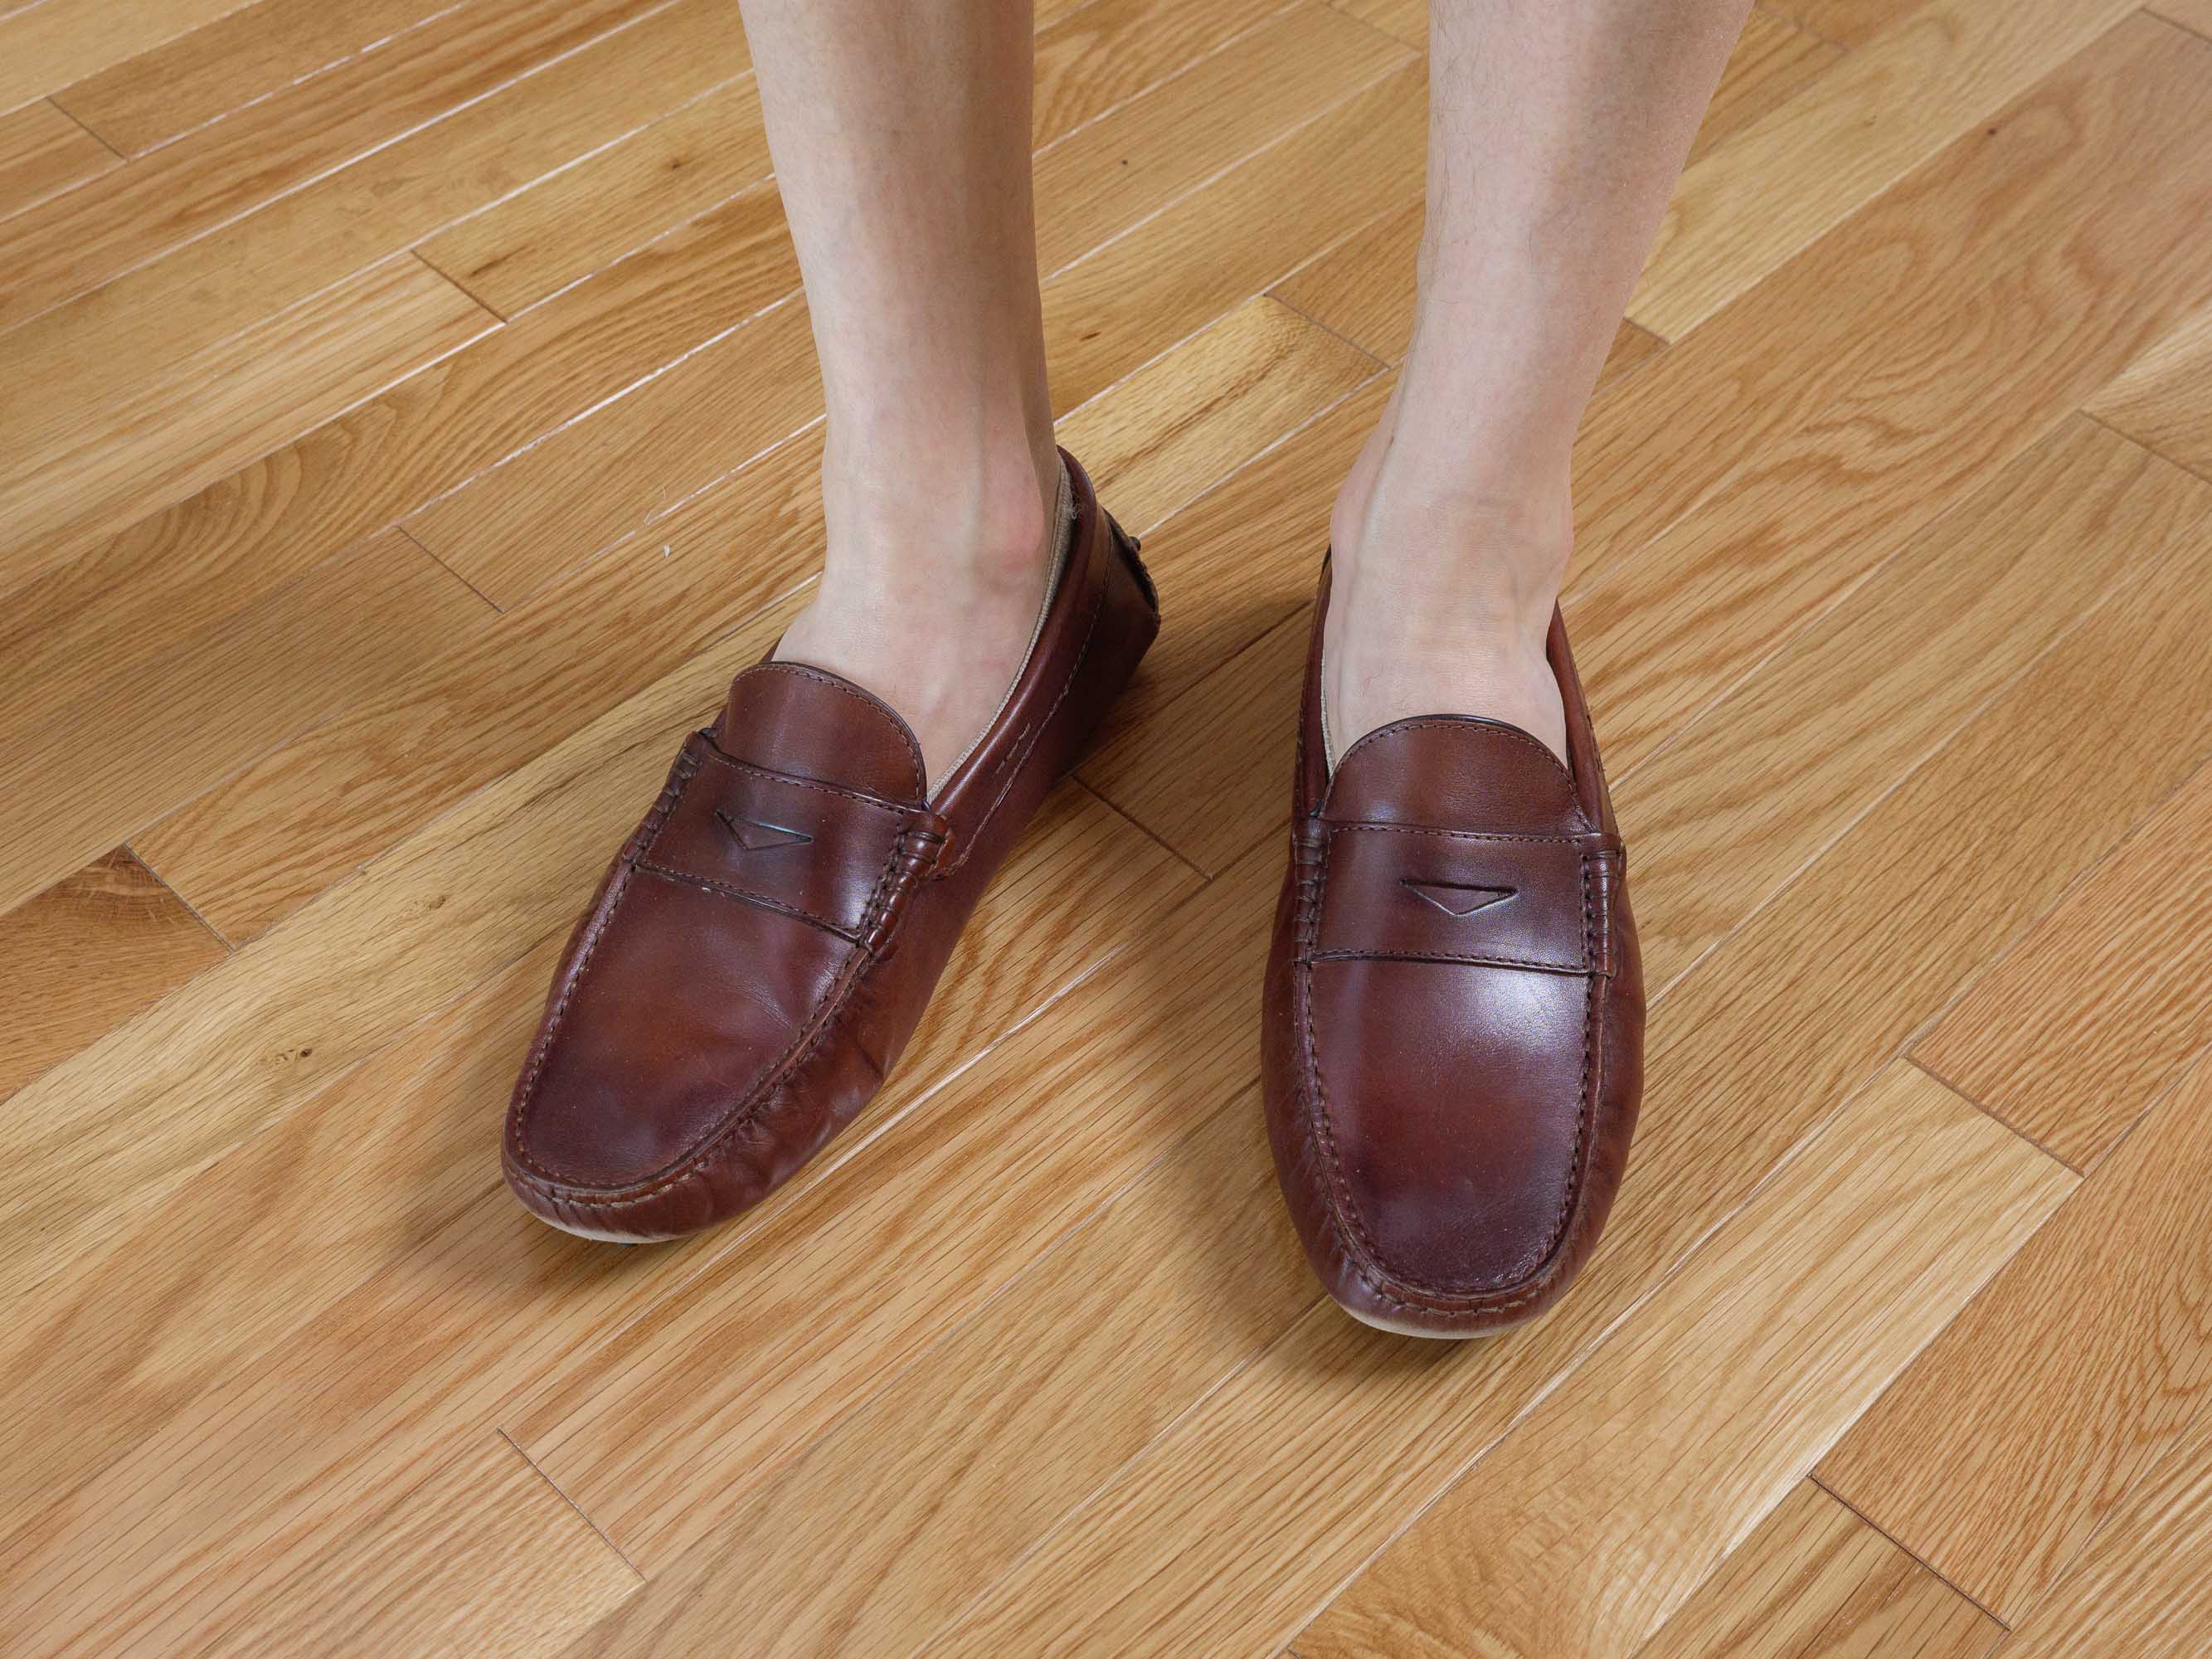 No-Show and Loafer Socks –